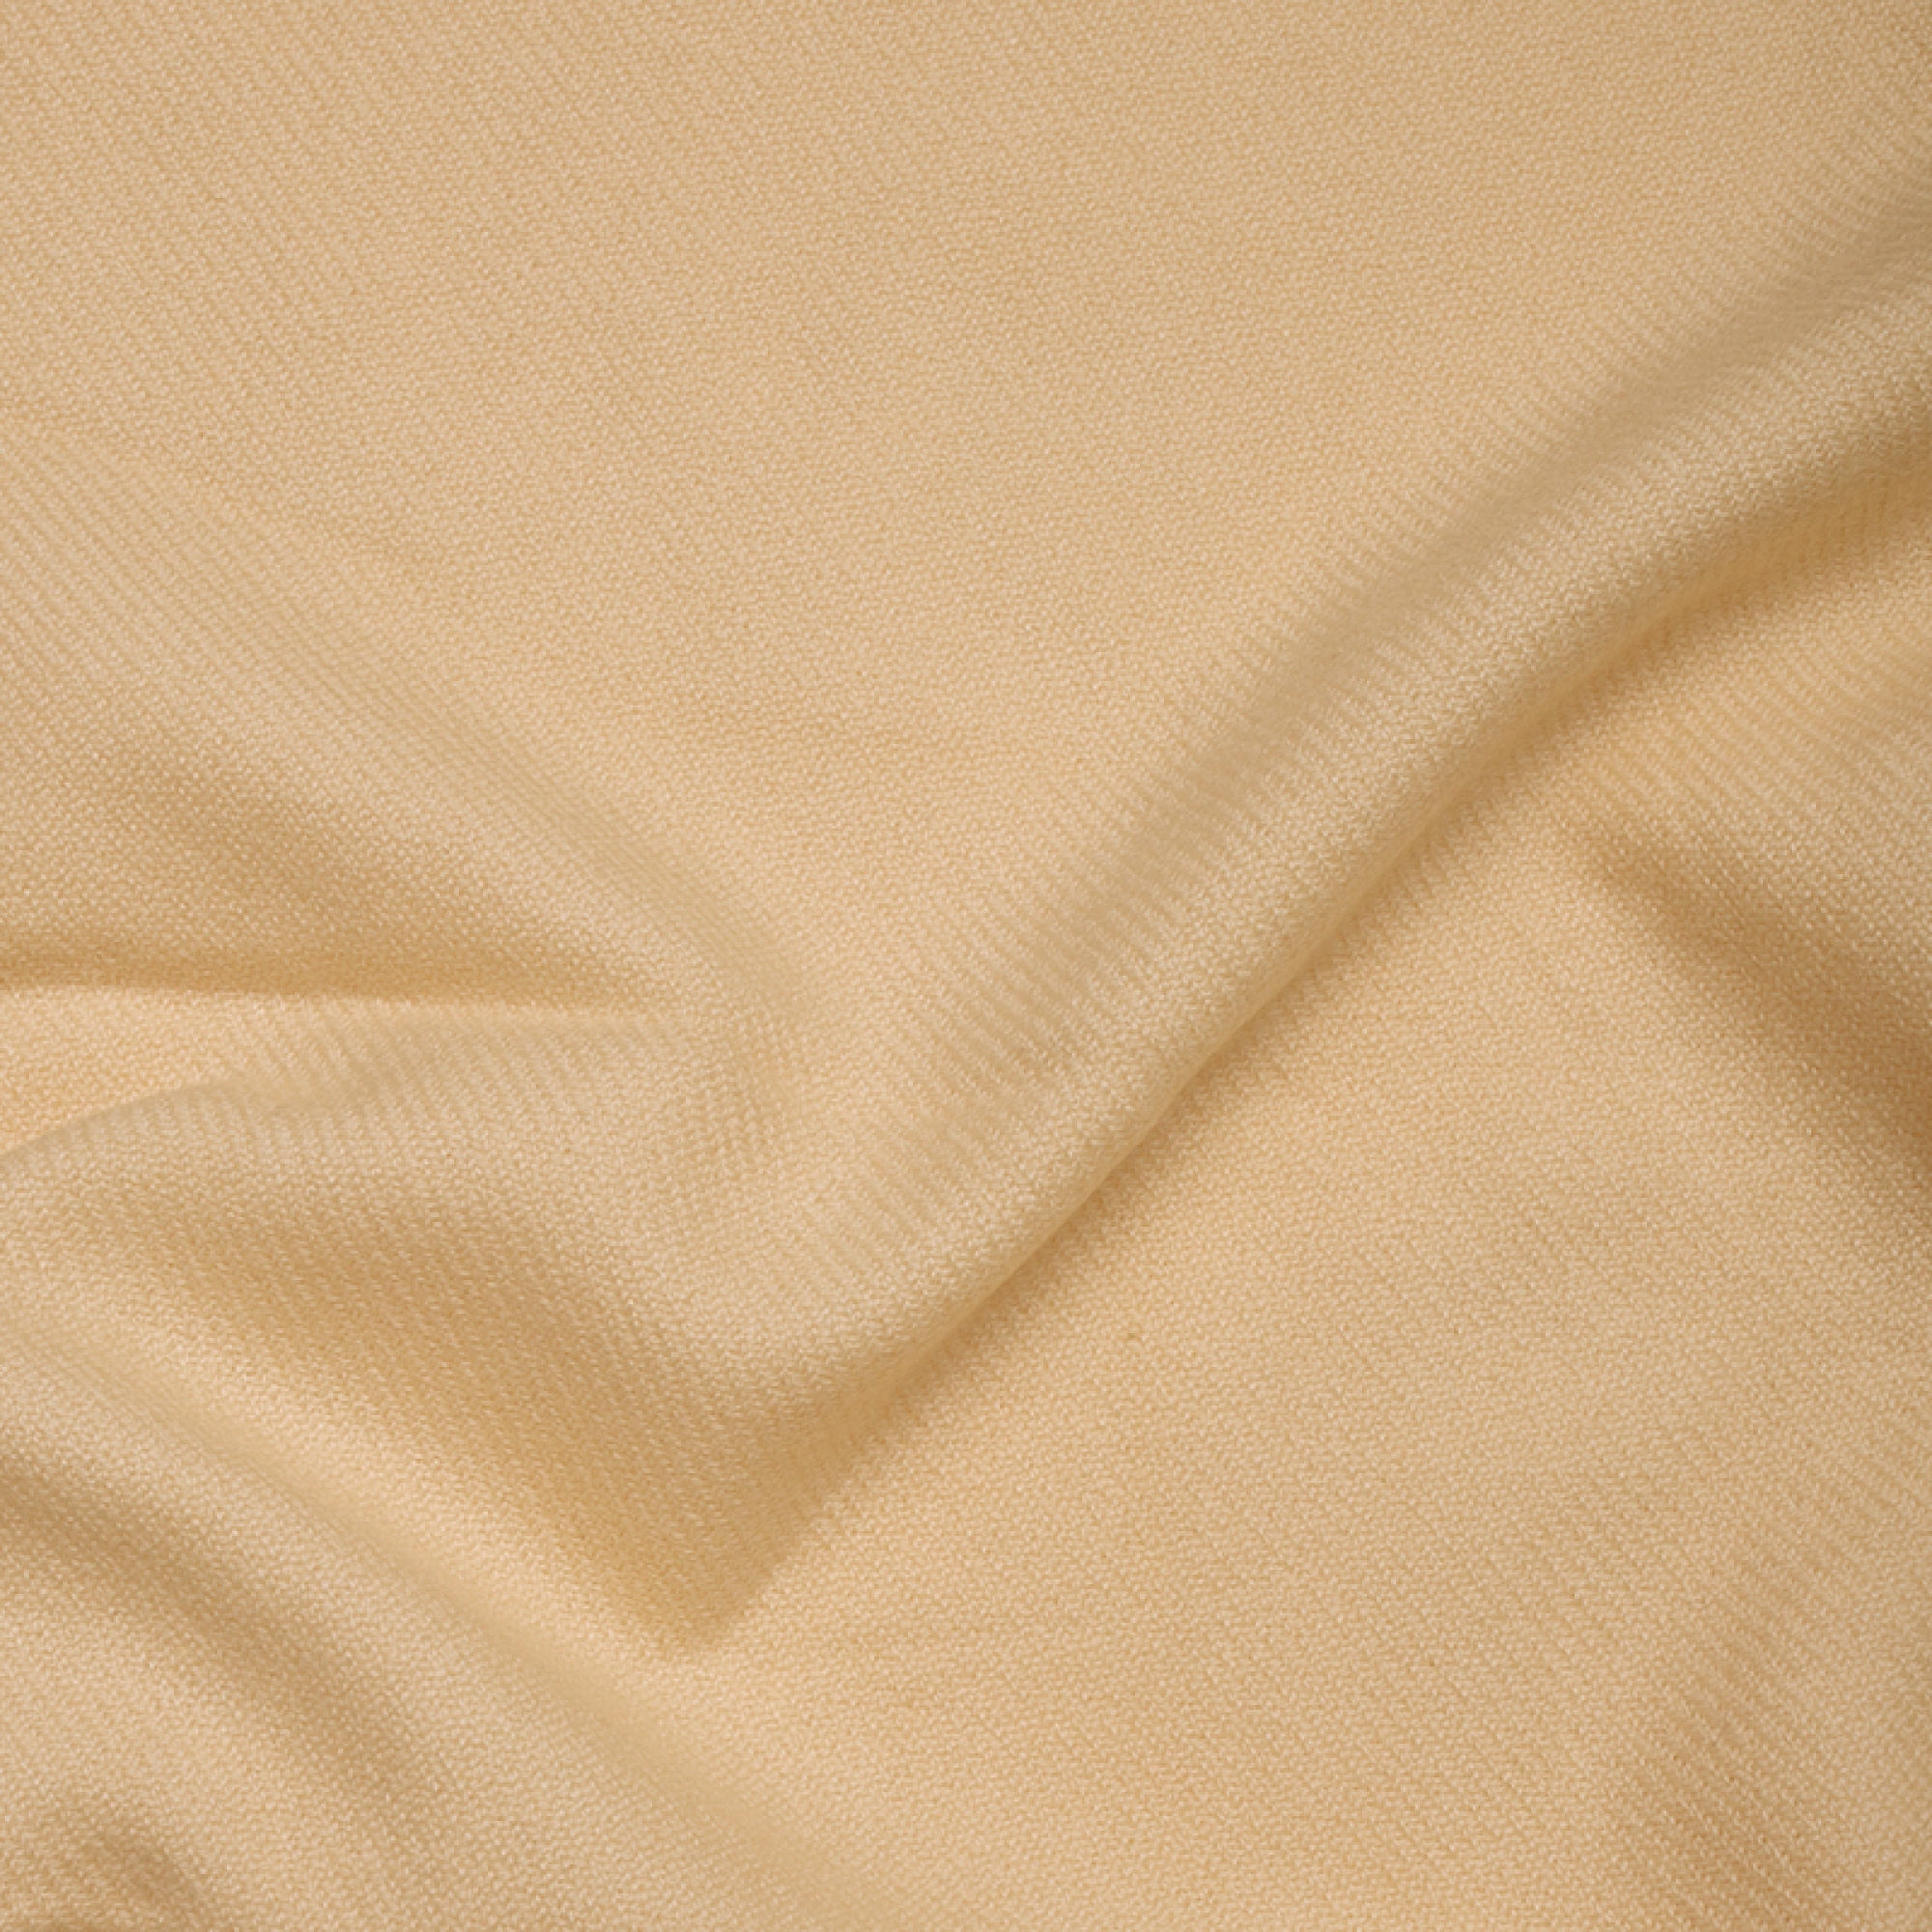 Cashmere accessories cocooning toodoo plain s 140 x 200 champagne 140 x 200 cm